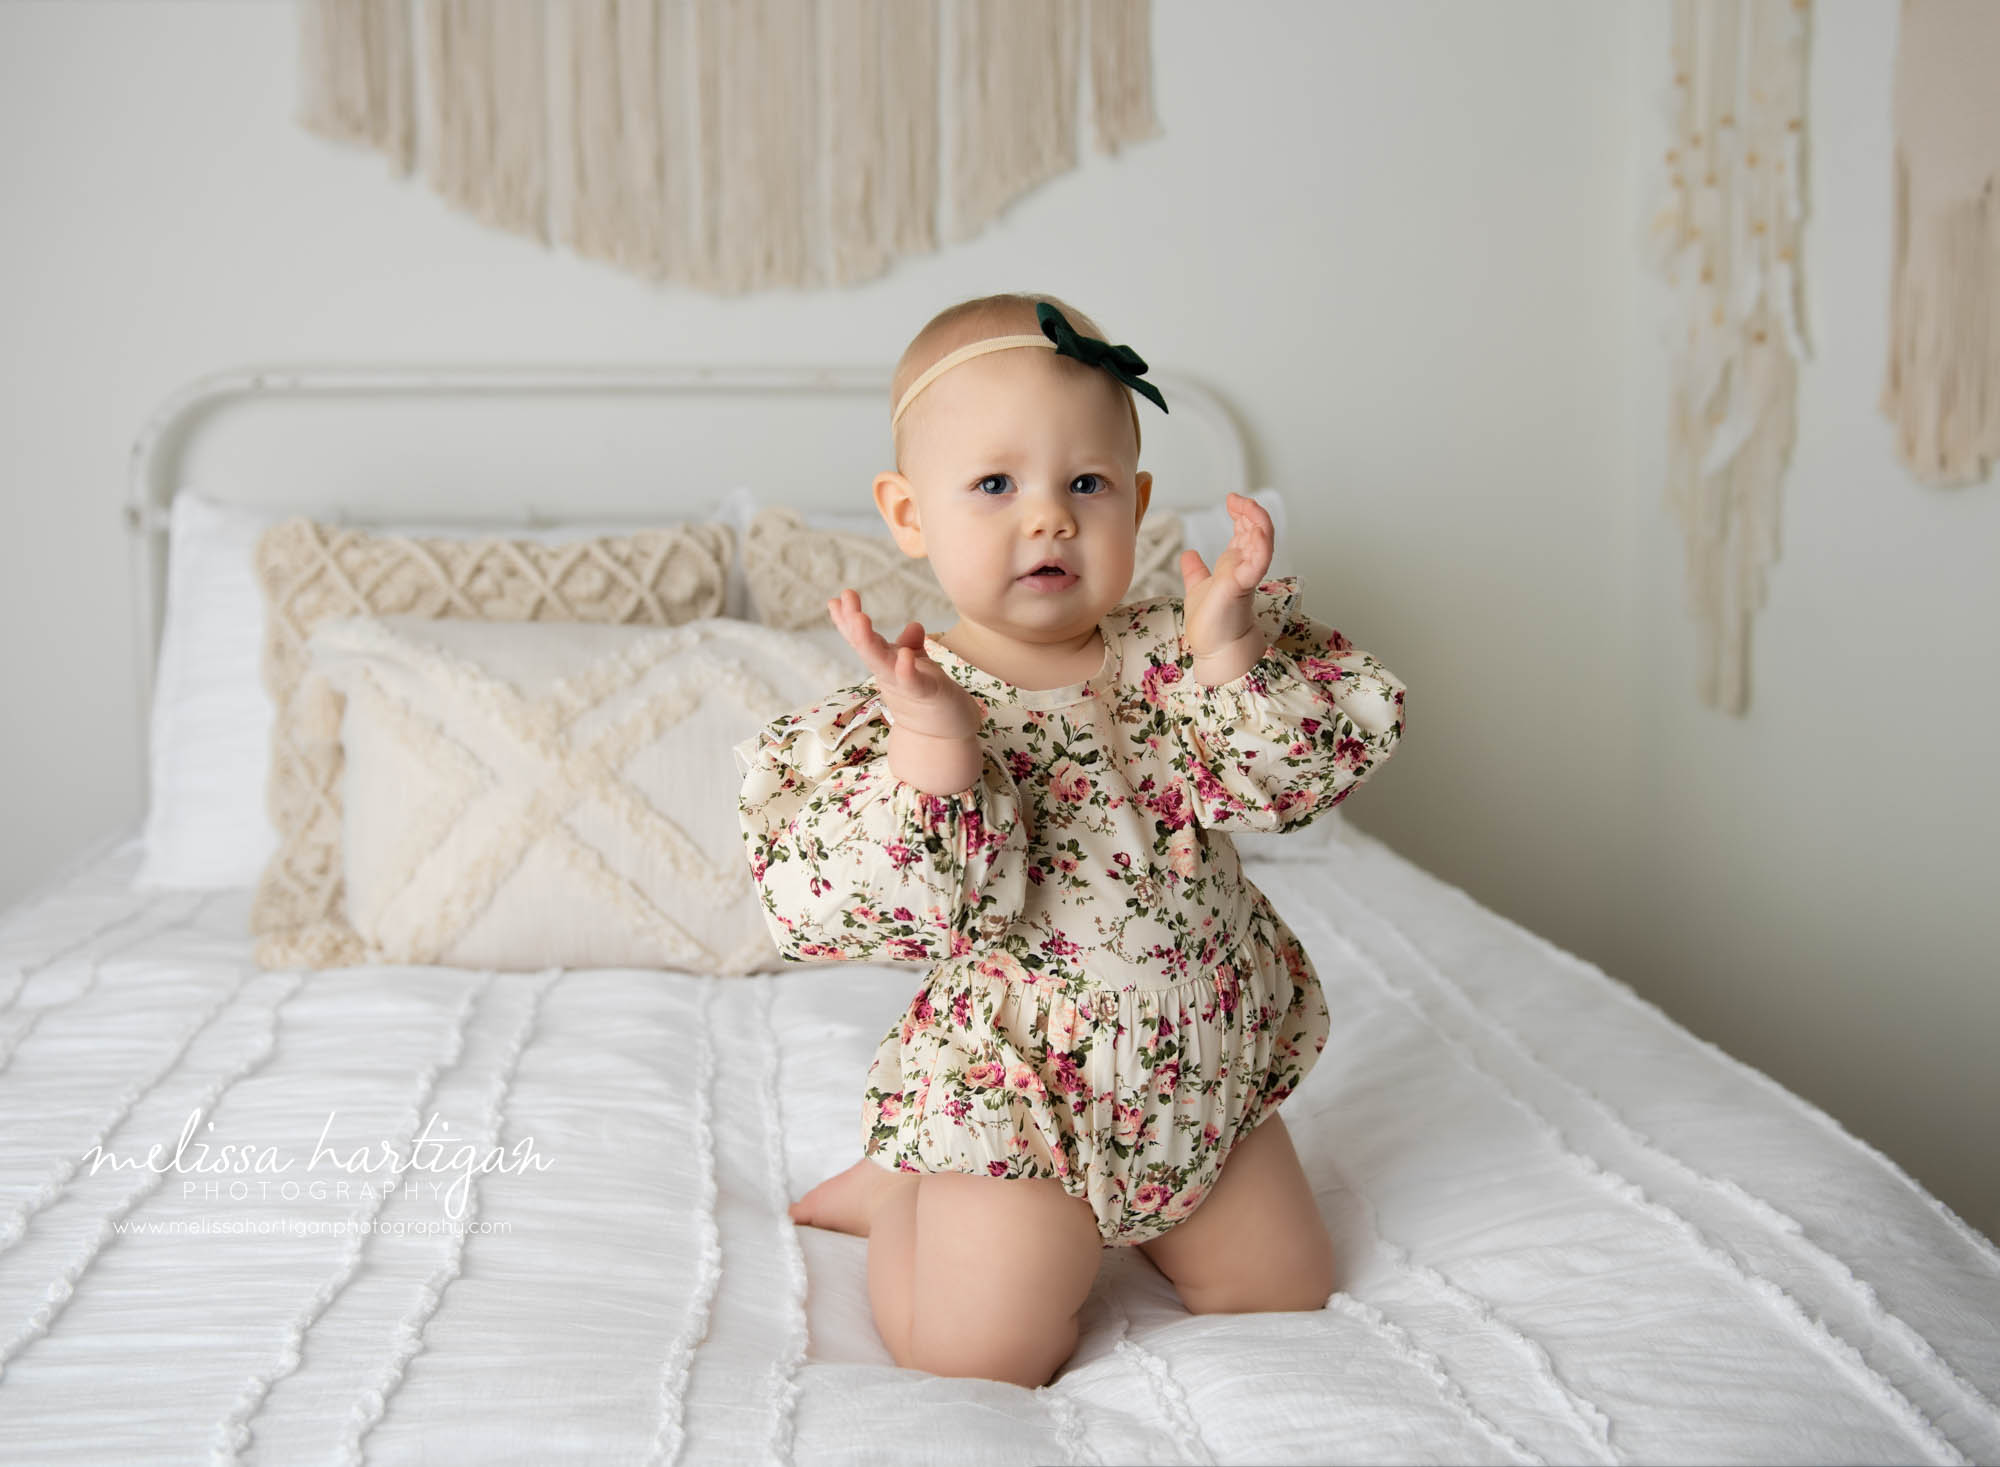 baby girl kneeling on bed clapping